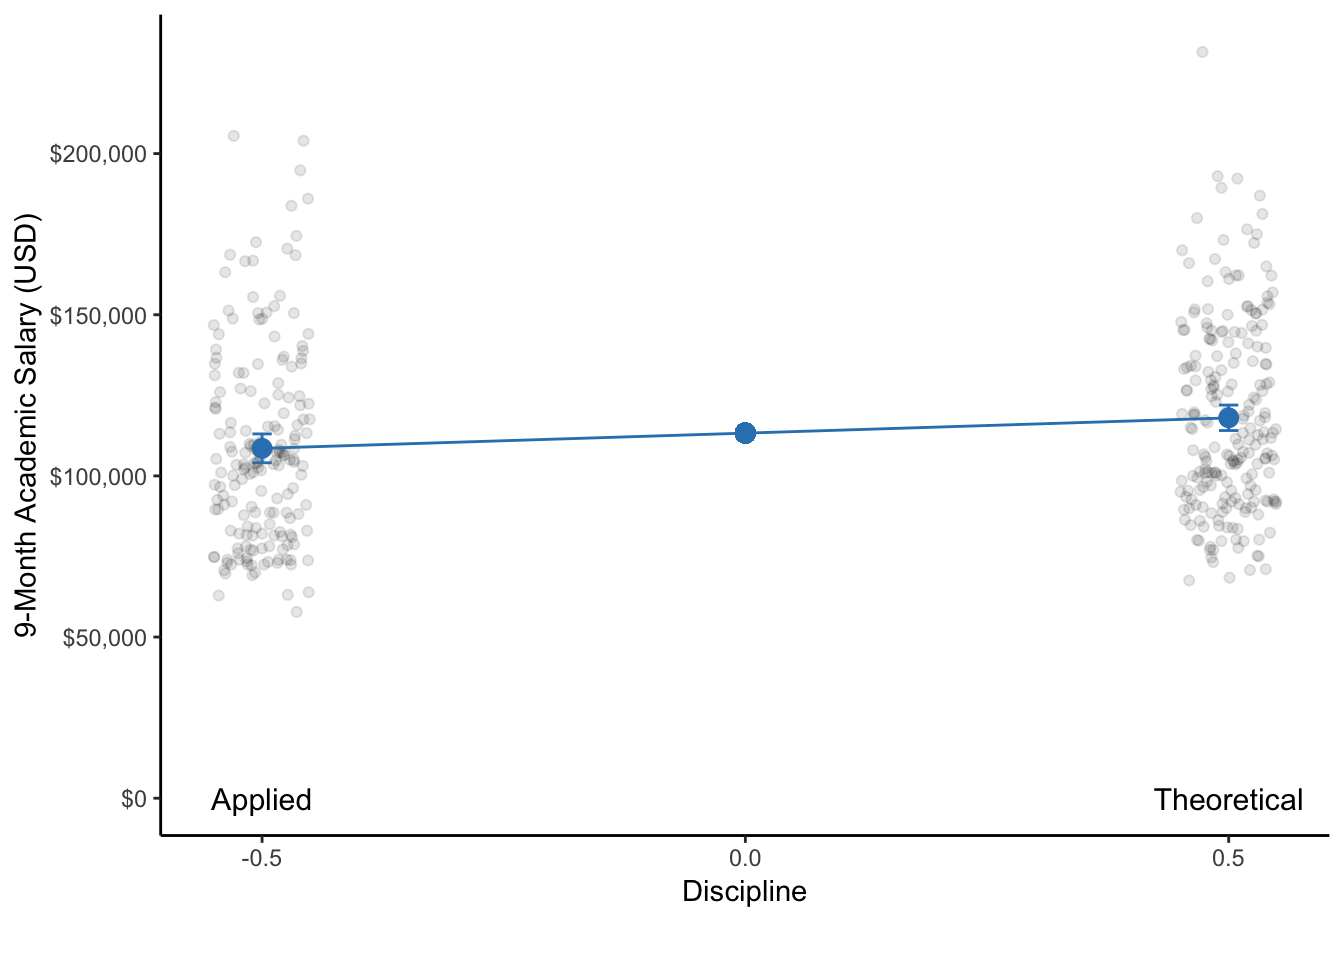 A dot plot of the 9-month academic salaries of professors that are in applied compared to theoretical disciplines. With respect to each discipline, the dot represents the mean salary and the bars represent the 95% CI. 
Note: The data points of each group are actually only on a single line on the x-axis. They are only jittered (dispersed) for easier visualization of all data points.